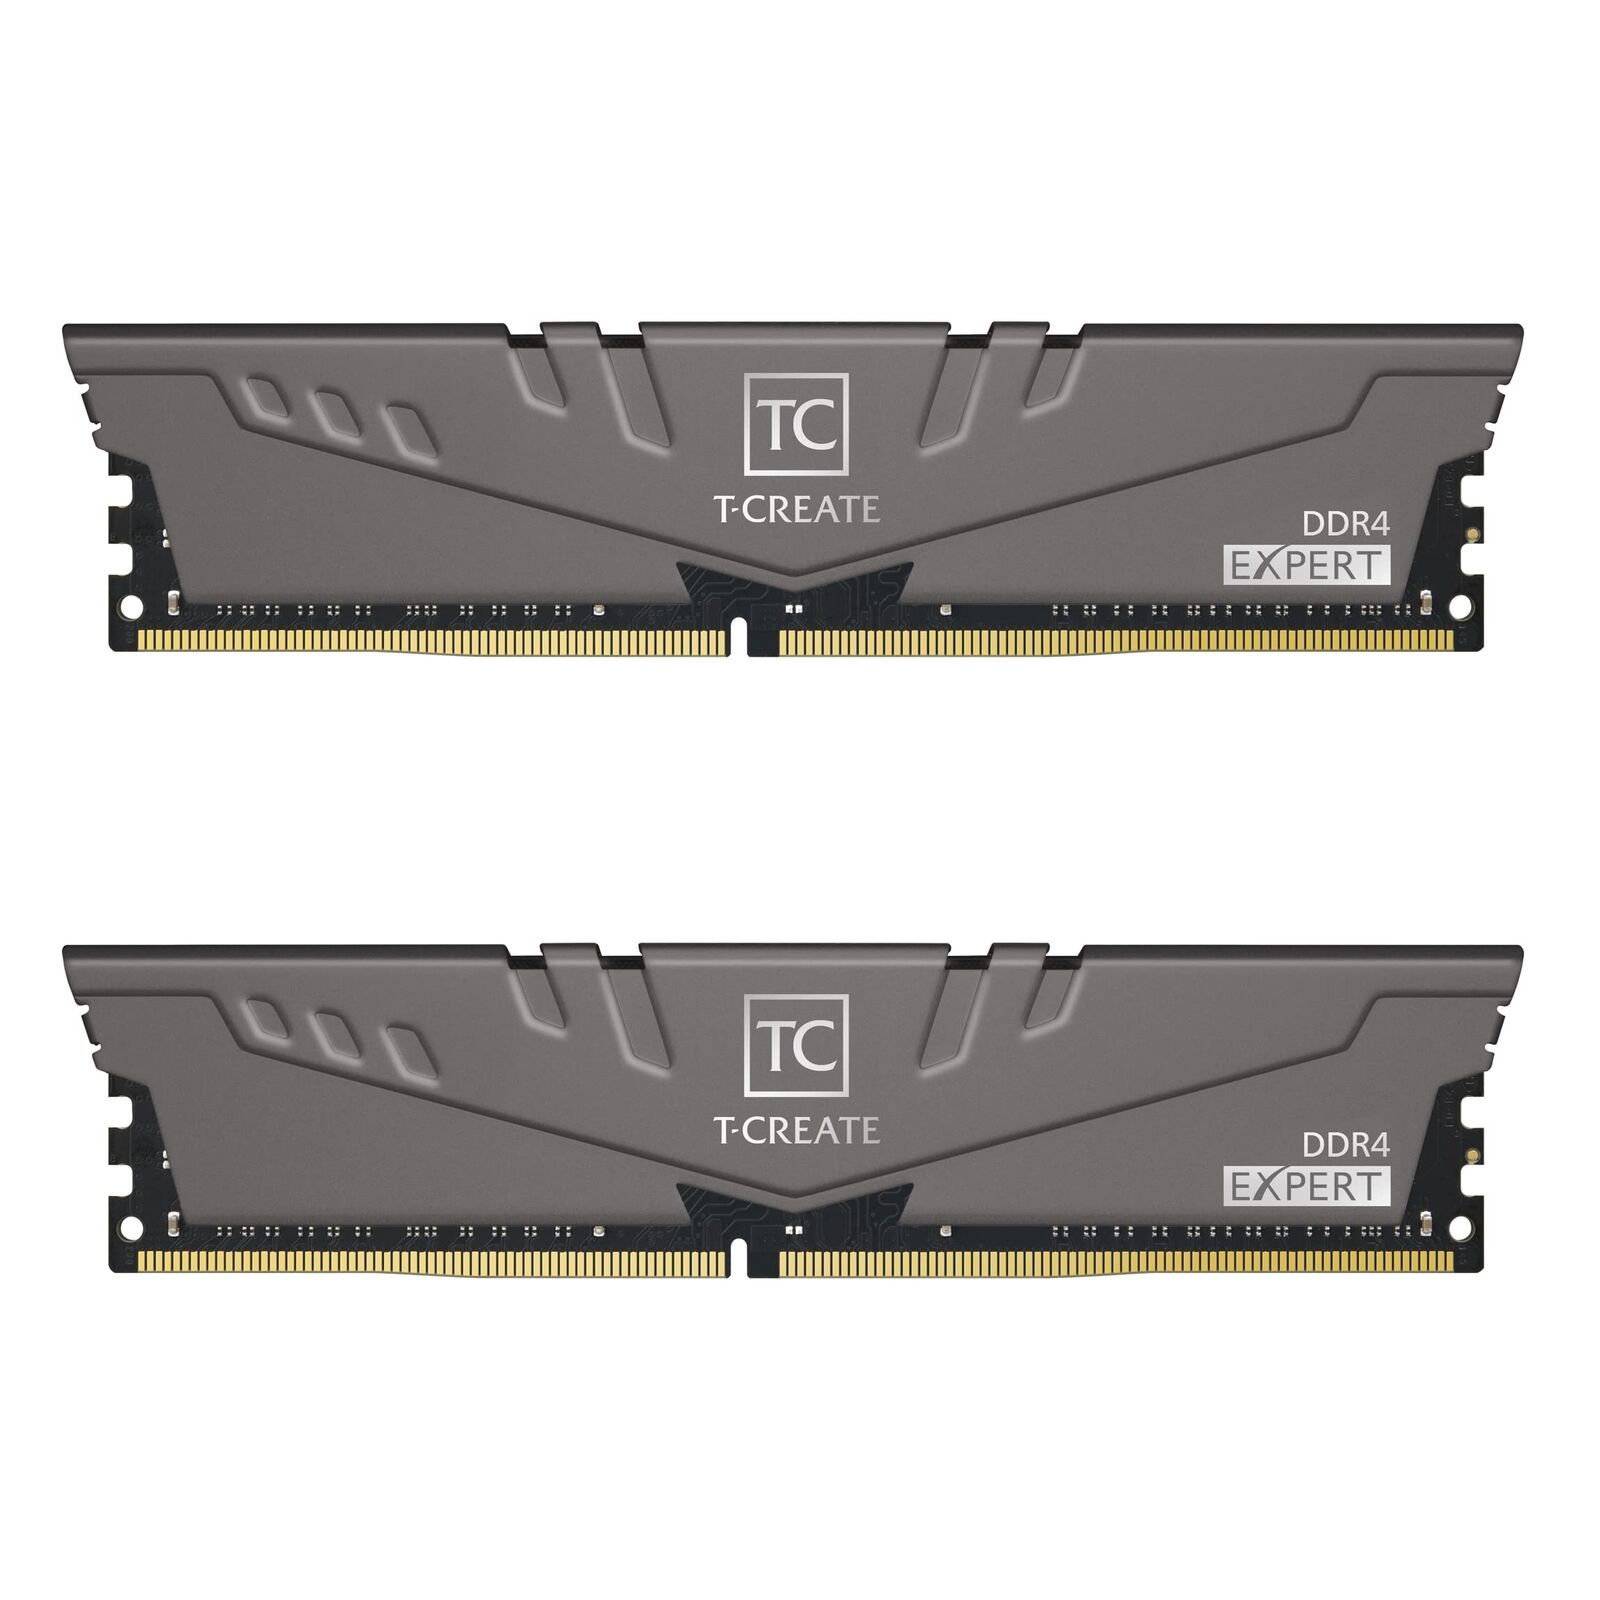 Teamgroup T-create Expert Overclocking 10L Ddr4 32Gb Kit (2 X 16Gb) 3600Mhz (Pc4